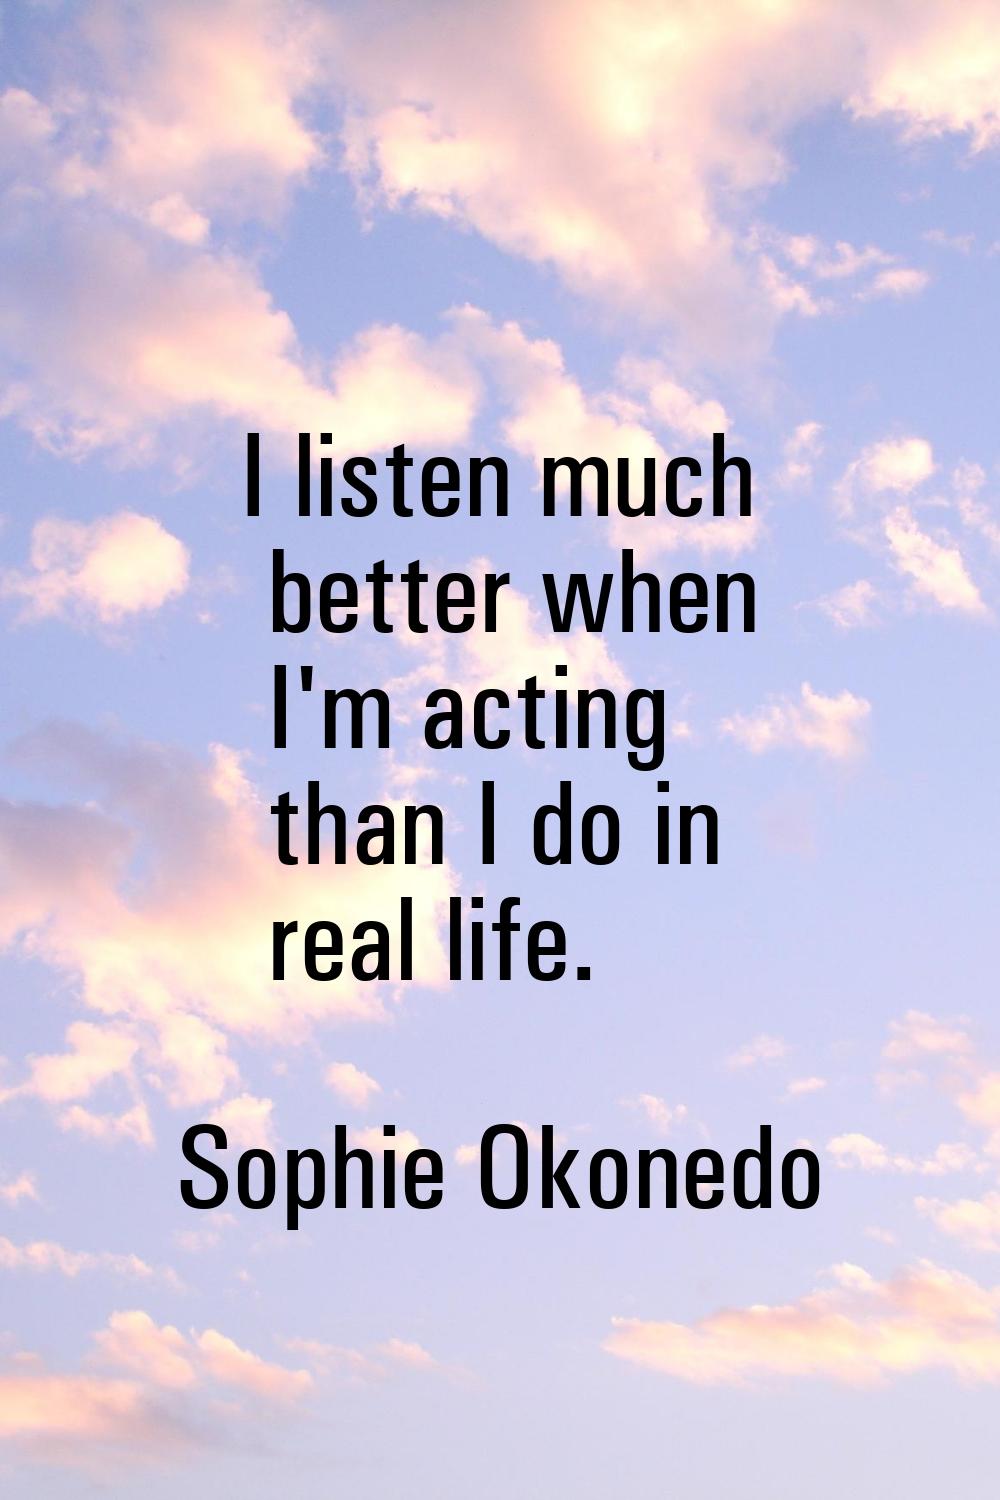 I listen much better when I'm acting than I do in real life.